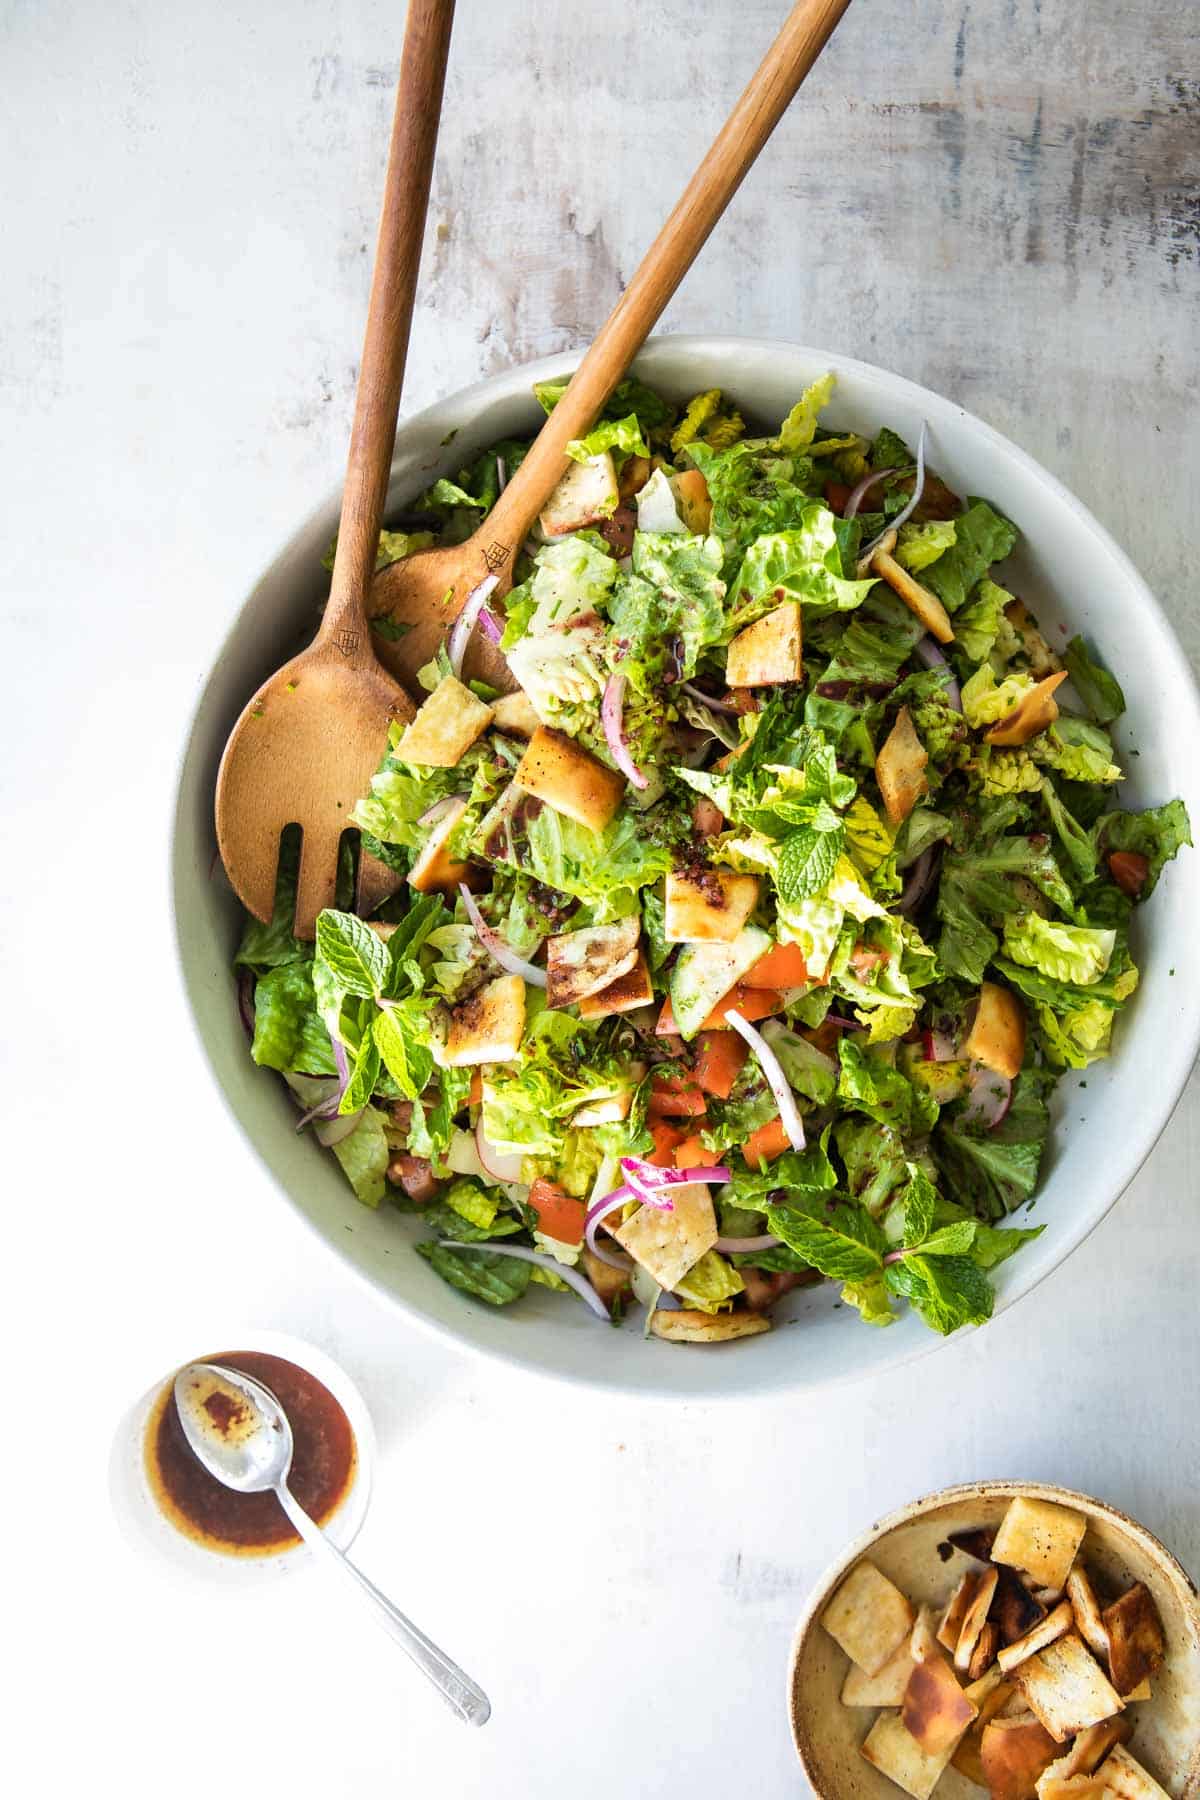 A serving bowl of fattoush salad with wooden serving utensils.